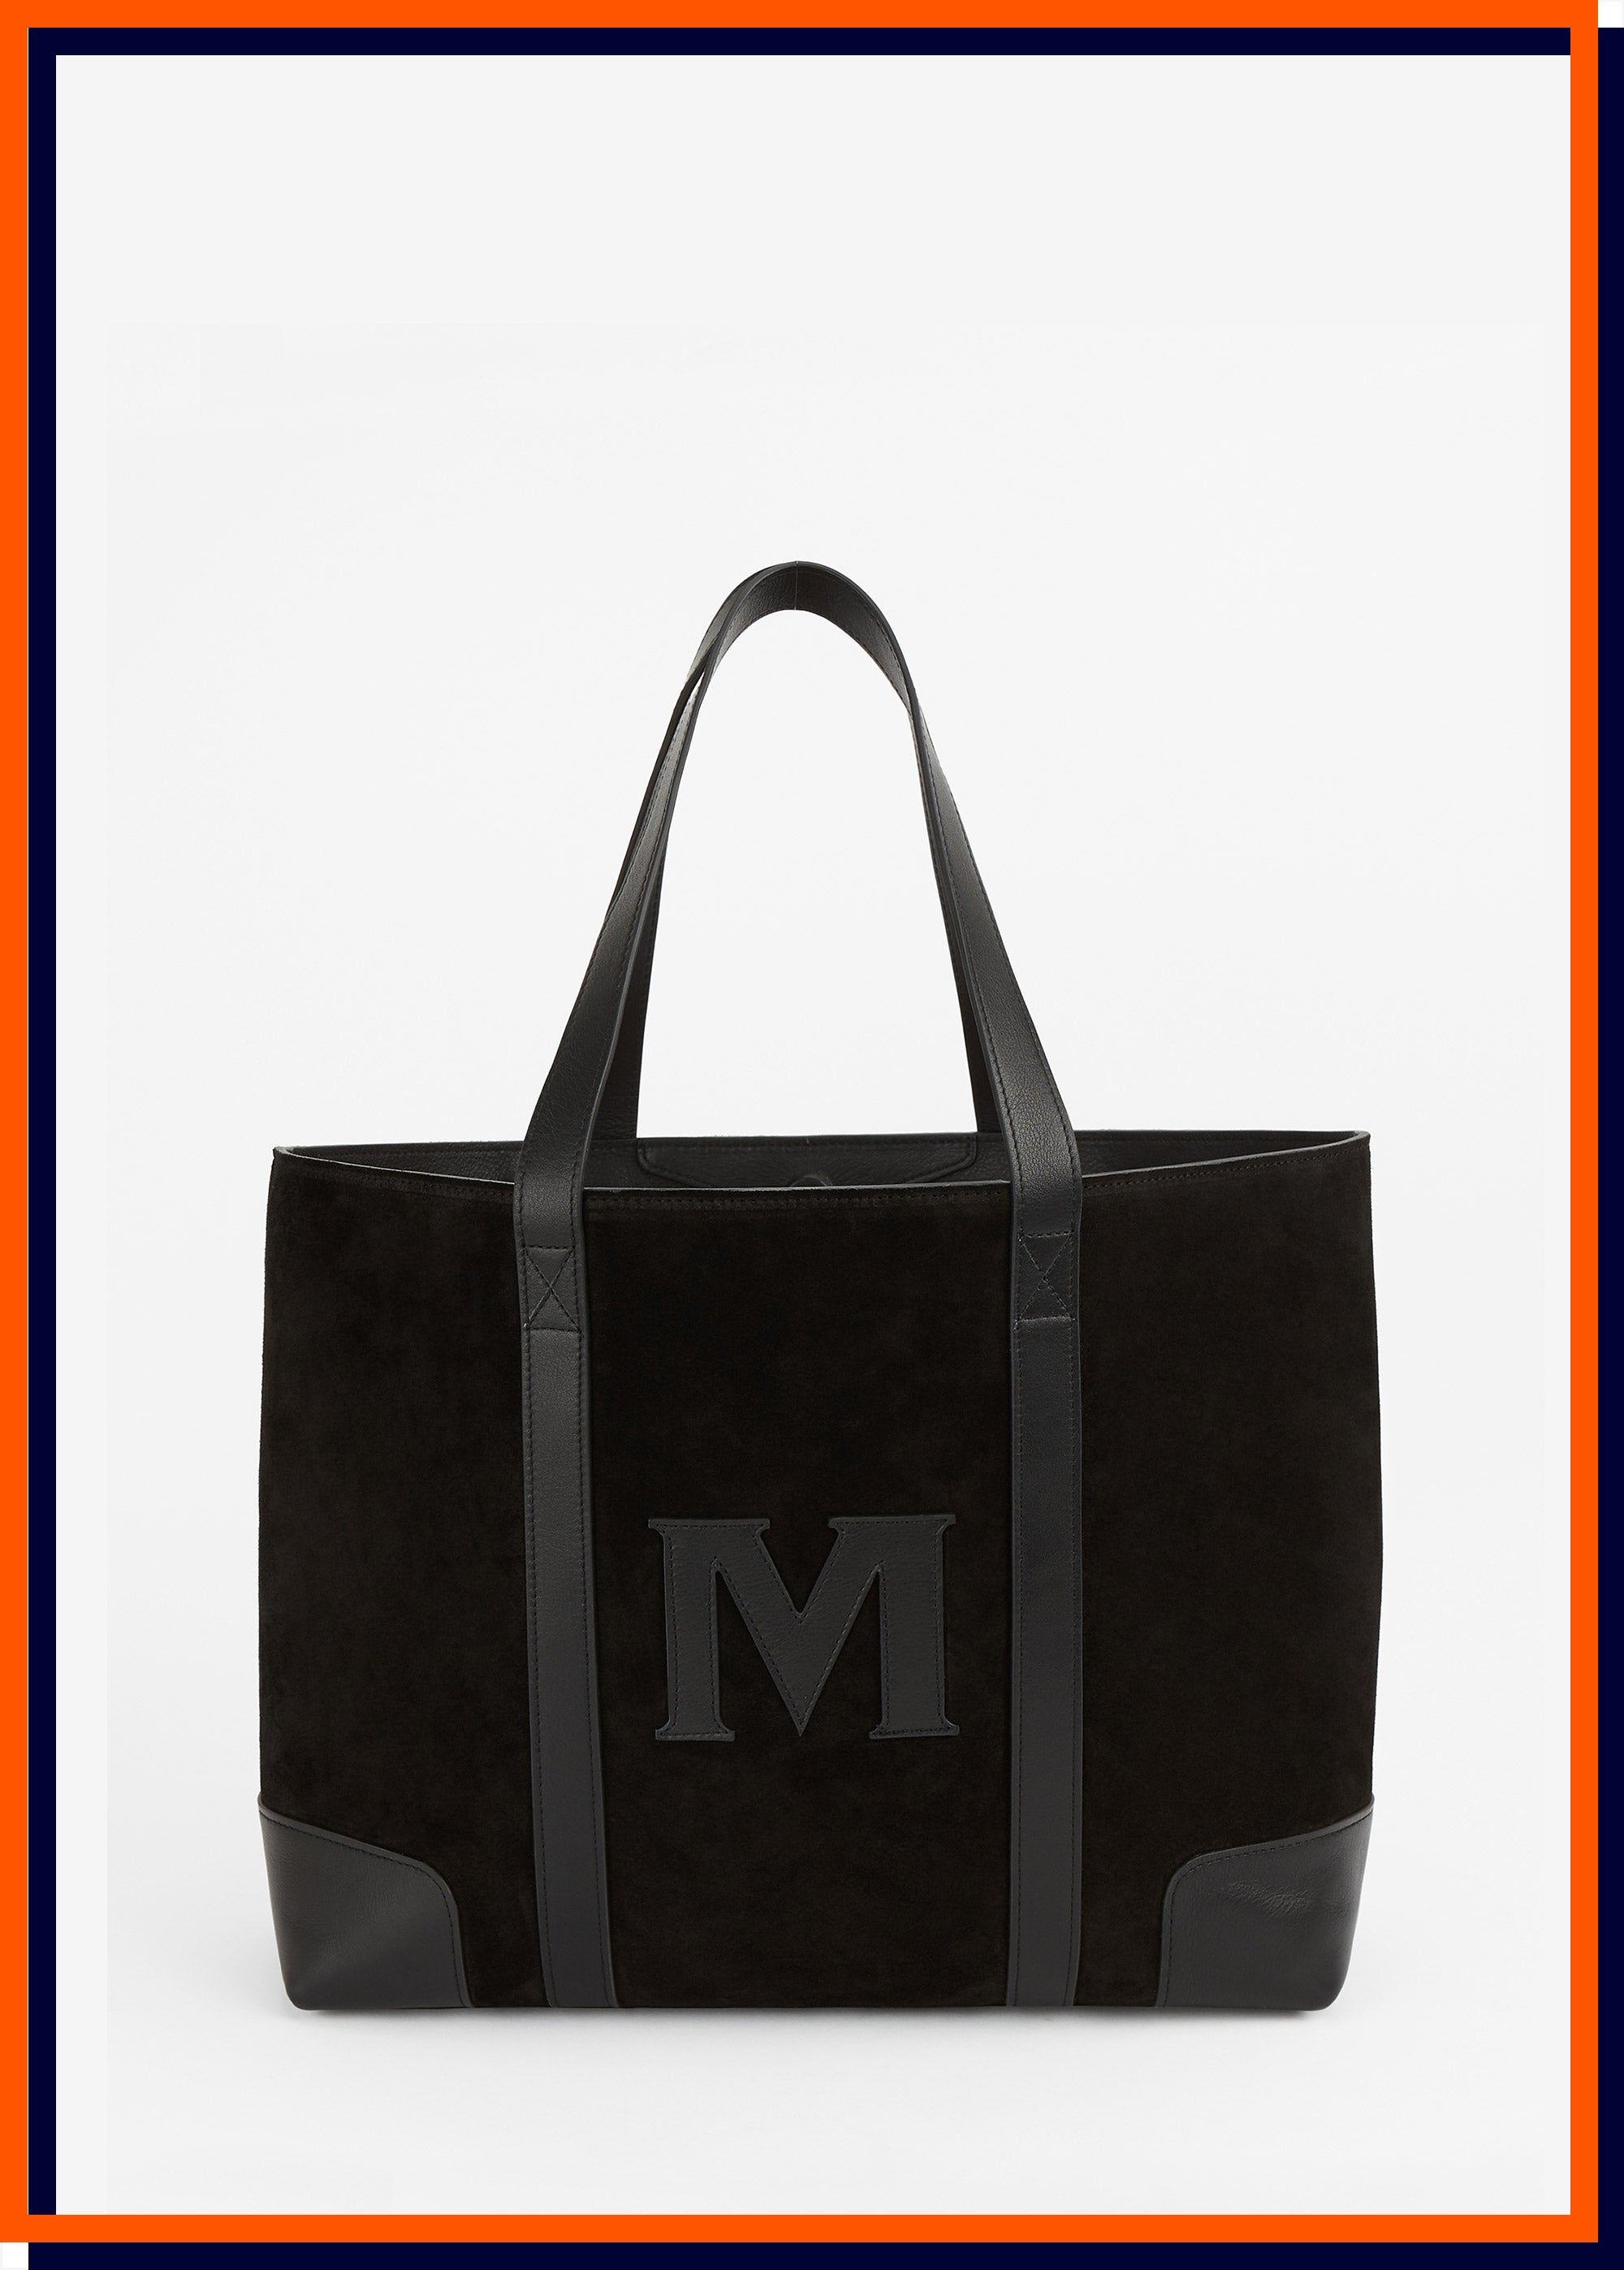 Letter 'M' - The Suede Tote Bag, Black